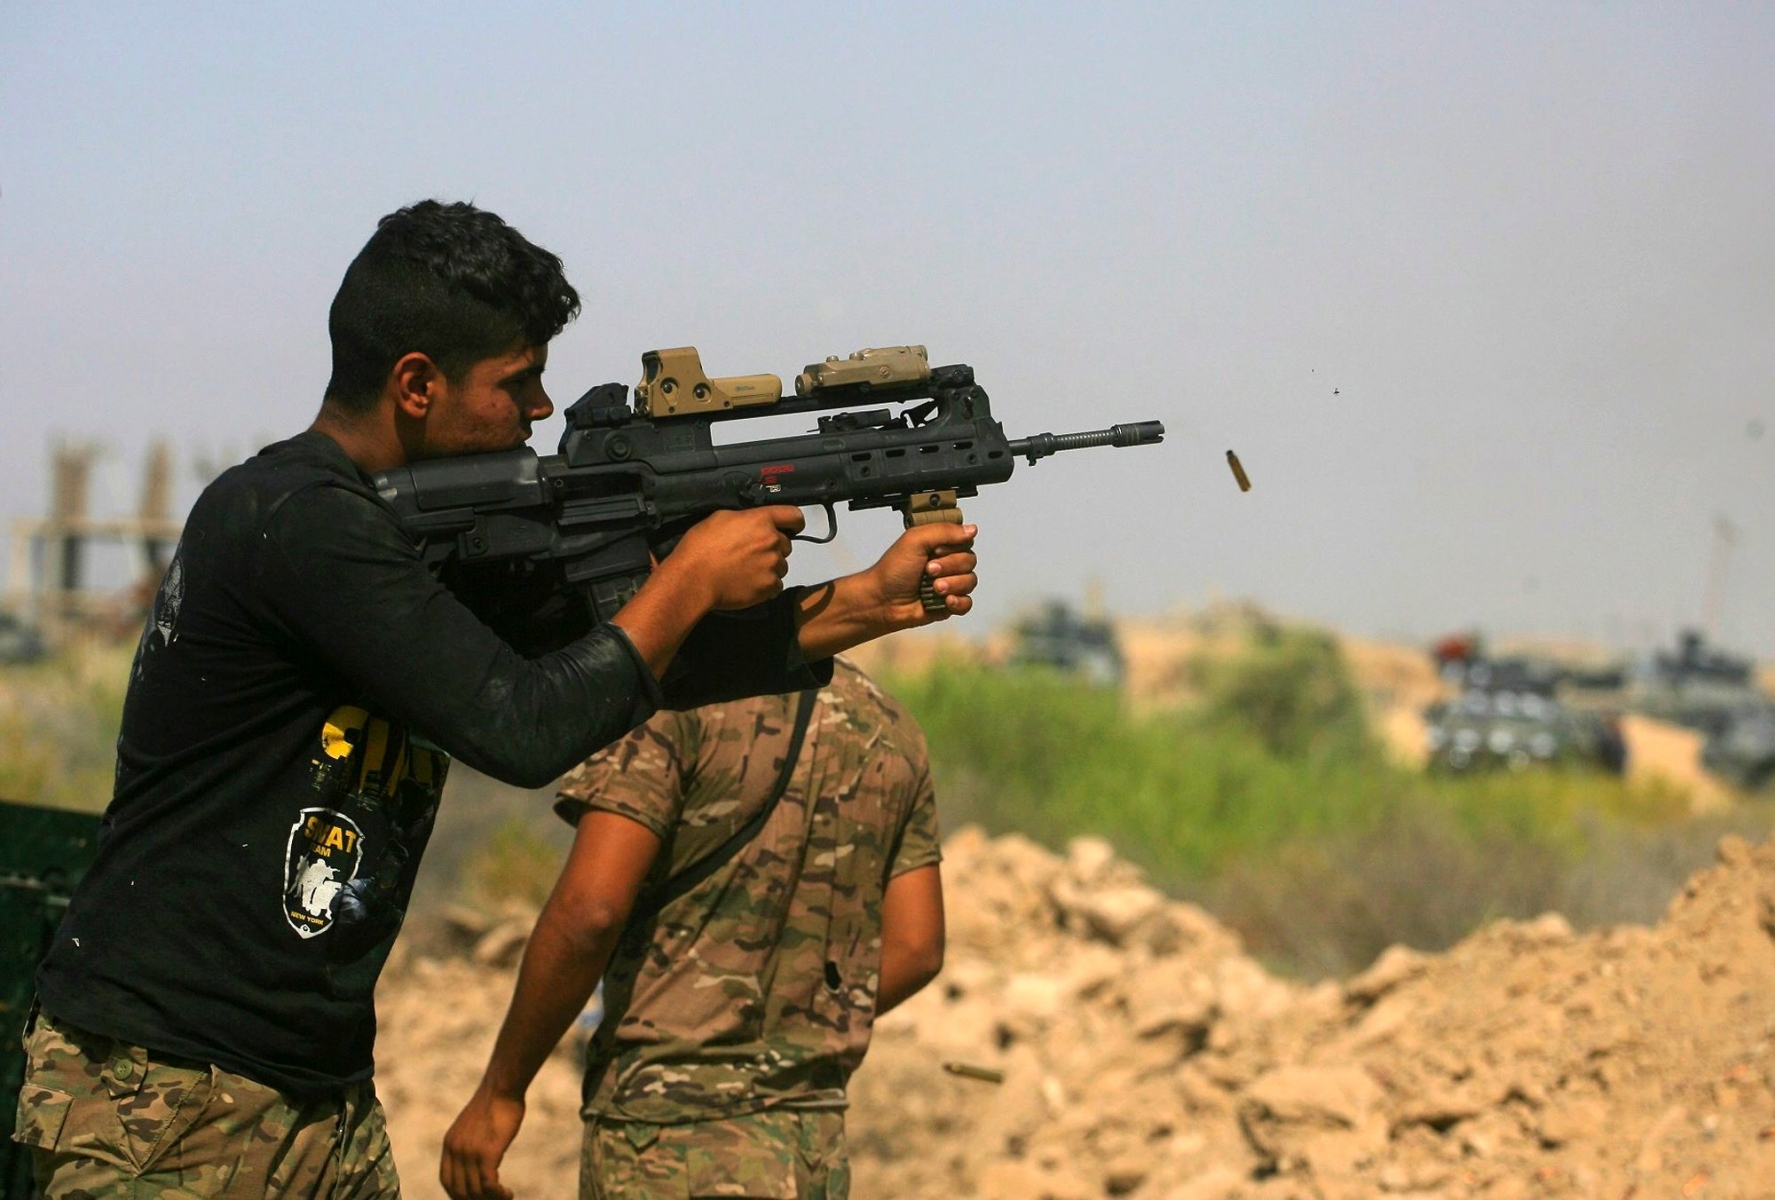 Iraqi security forces fight against Islamic State group militants in Fallujah, Iraq, Wednesday, June 15, 2016. Fallujah has been locked in a cycle of conflict since 2003, when it emerged as a bastion of the insurgency against the Americans. Militant attacks and bombings were followed by sweeping arrest raids, which further stoked local grievances. In 2004, U.S. troops launched two massive assaults on the city, where they fought their bloodiest battles since Vietnam. (AP Photo/Anmar Khalil) Mideast Iraq Islamic State